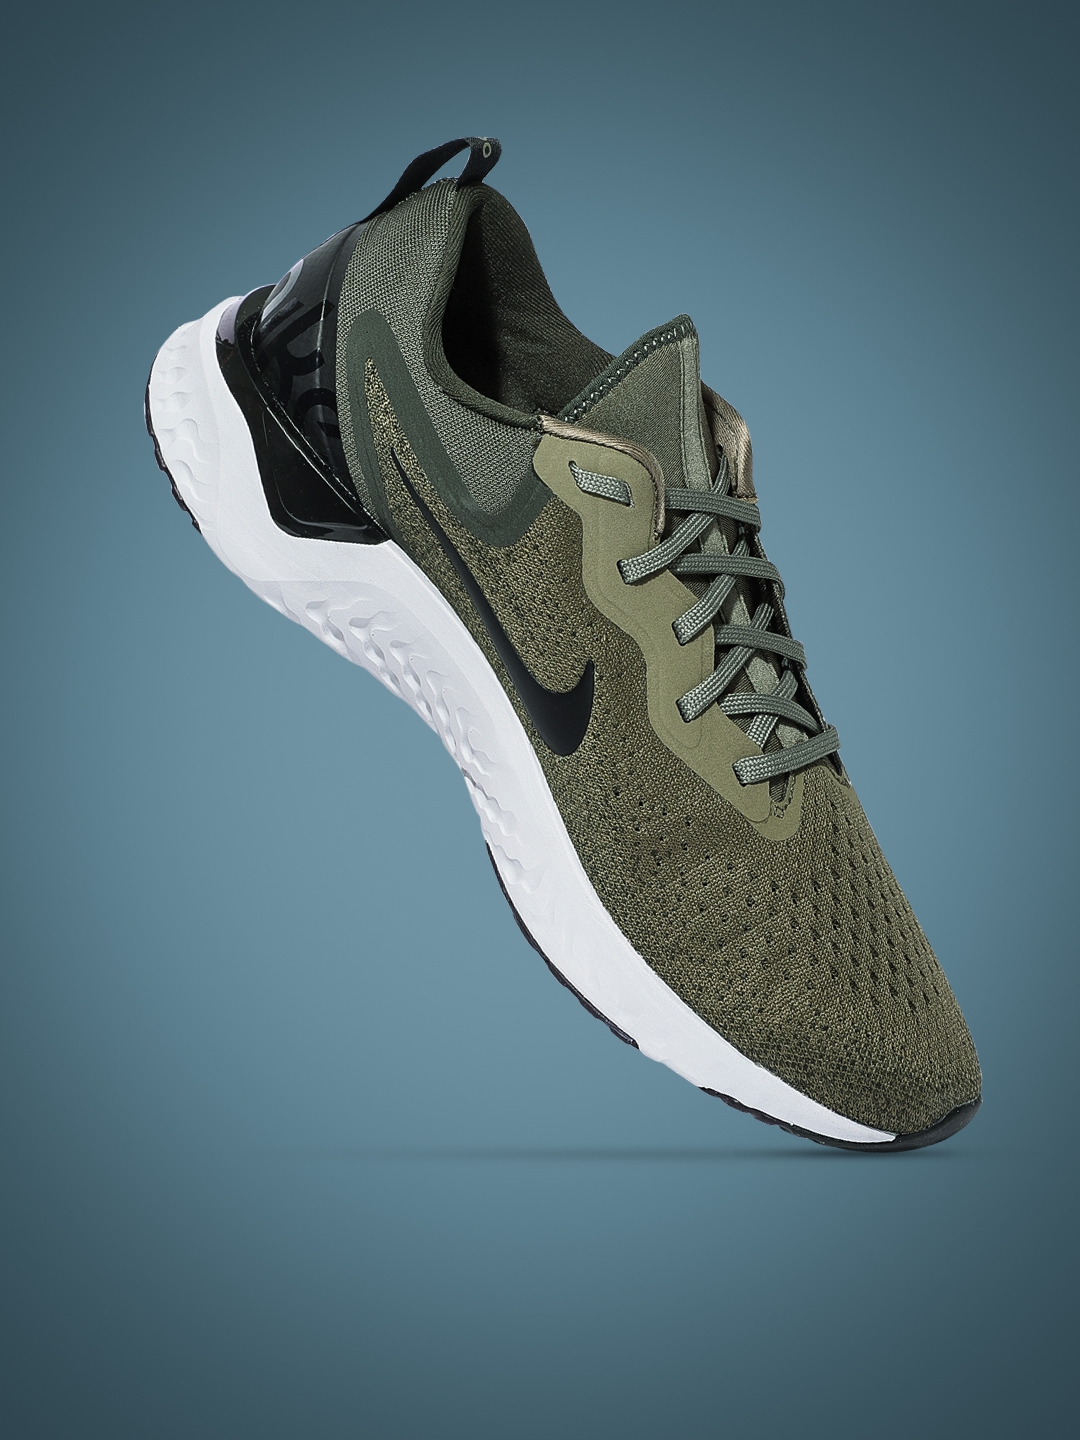 Lodge voordeel bord Buy Nike Men Olive Green ODYSSEY REACT Running Shoes - Sports Shoes for Men  4330999 | Myntra